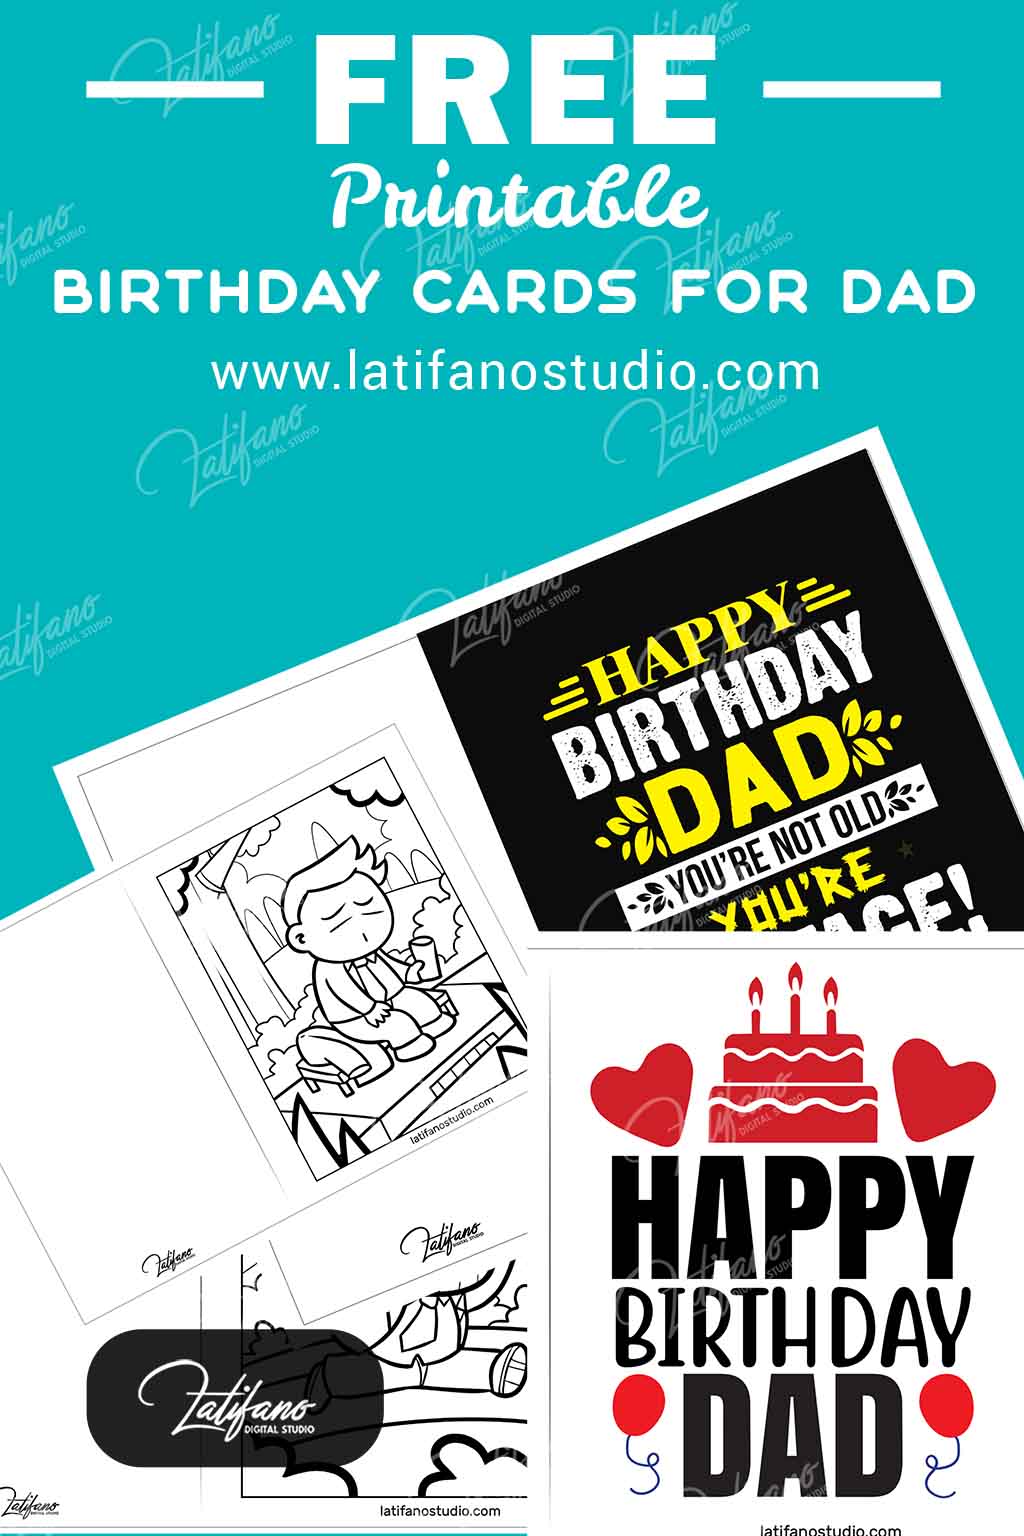 Free birthday cards for dad